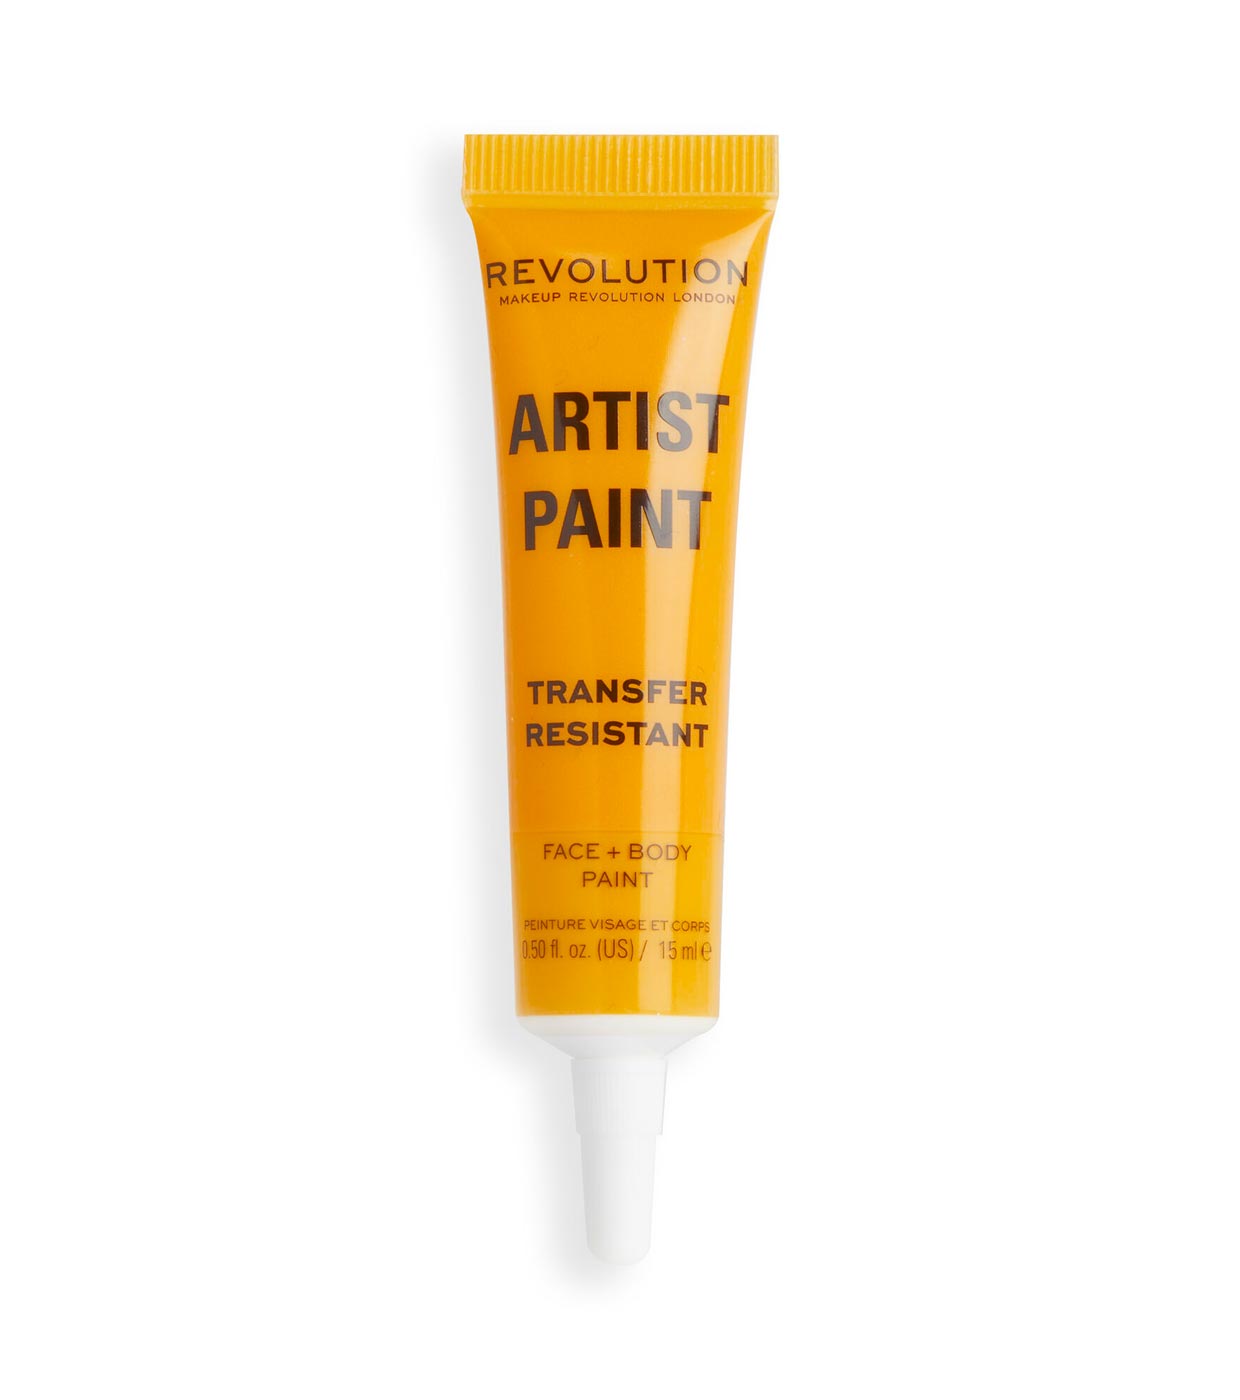 https://www.maquibeauty.fr/images/productos/revolution-artist-collection-pintura-para-rostro-artist-paint-yellow-1-76923.jpeg